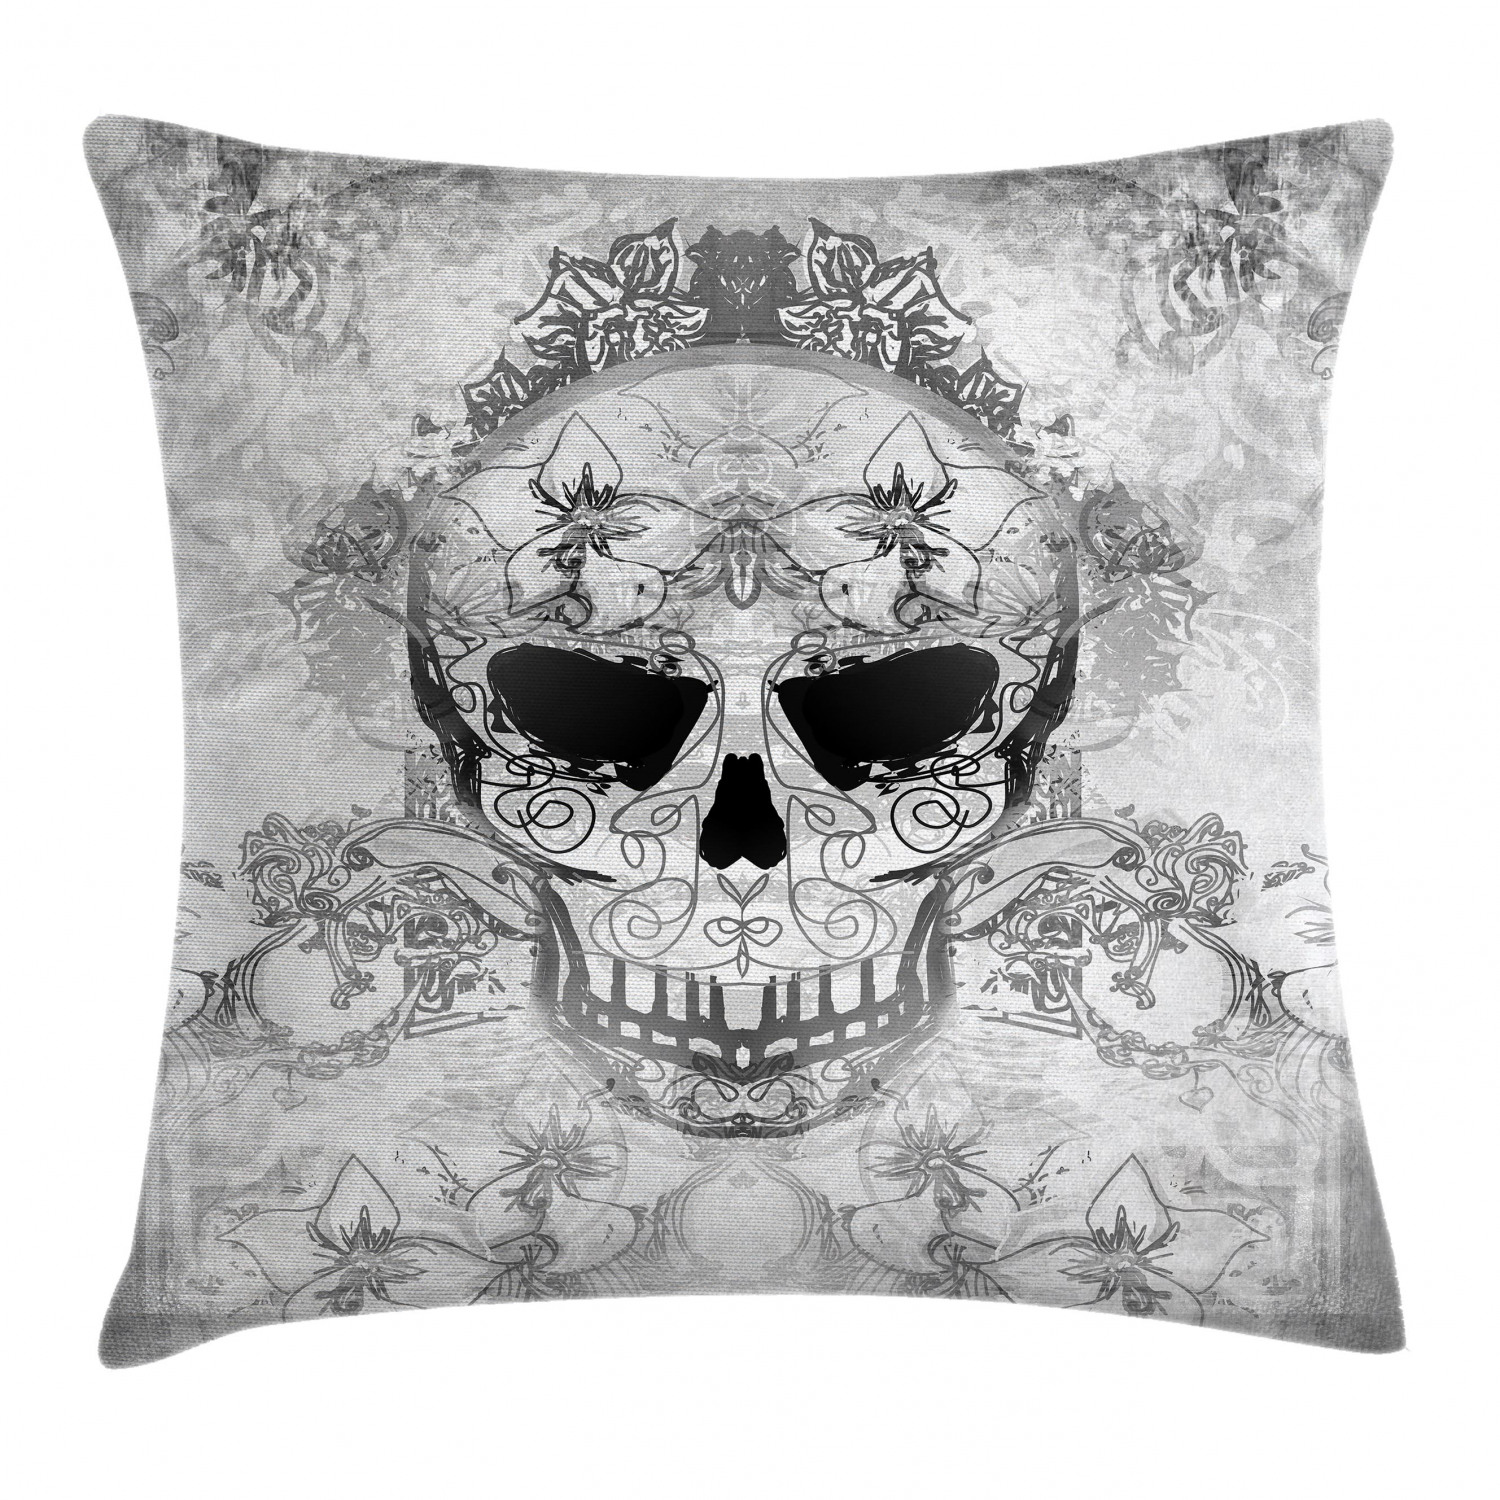 Day Of The Dead Decor Throw Pillow Cushion Cover, Skull with Oriental Paisley Decor Festive Celebration Print, Decorative Square Accent Pillow Case, 16 X 16 Inches, Light Grey and White, by Ambesonne - image 1 of 2